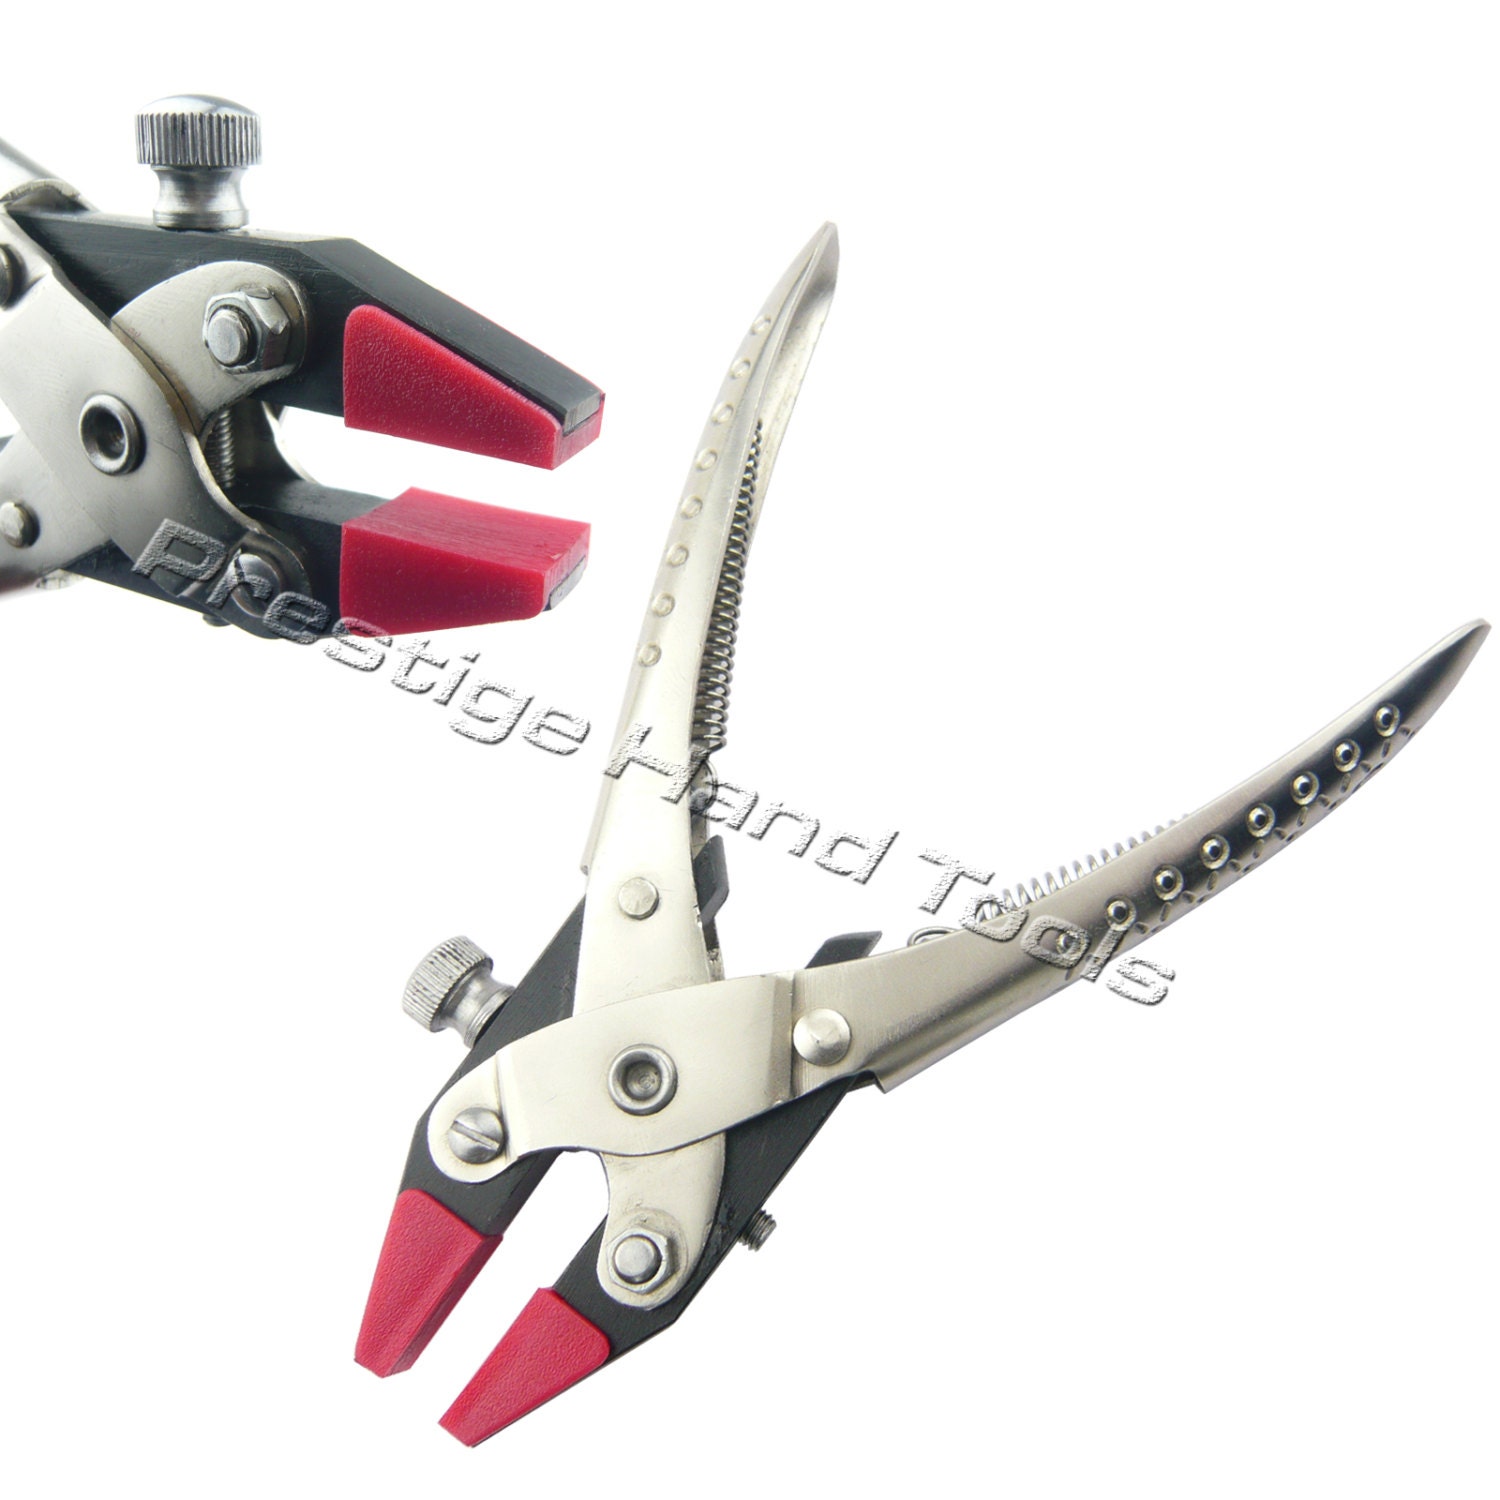 Parallel Action Pliers Adjustable Screw Flat Nose Smooth Jaws Jewellery  Crafts